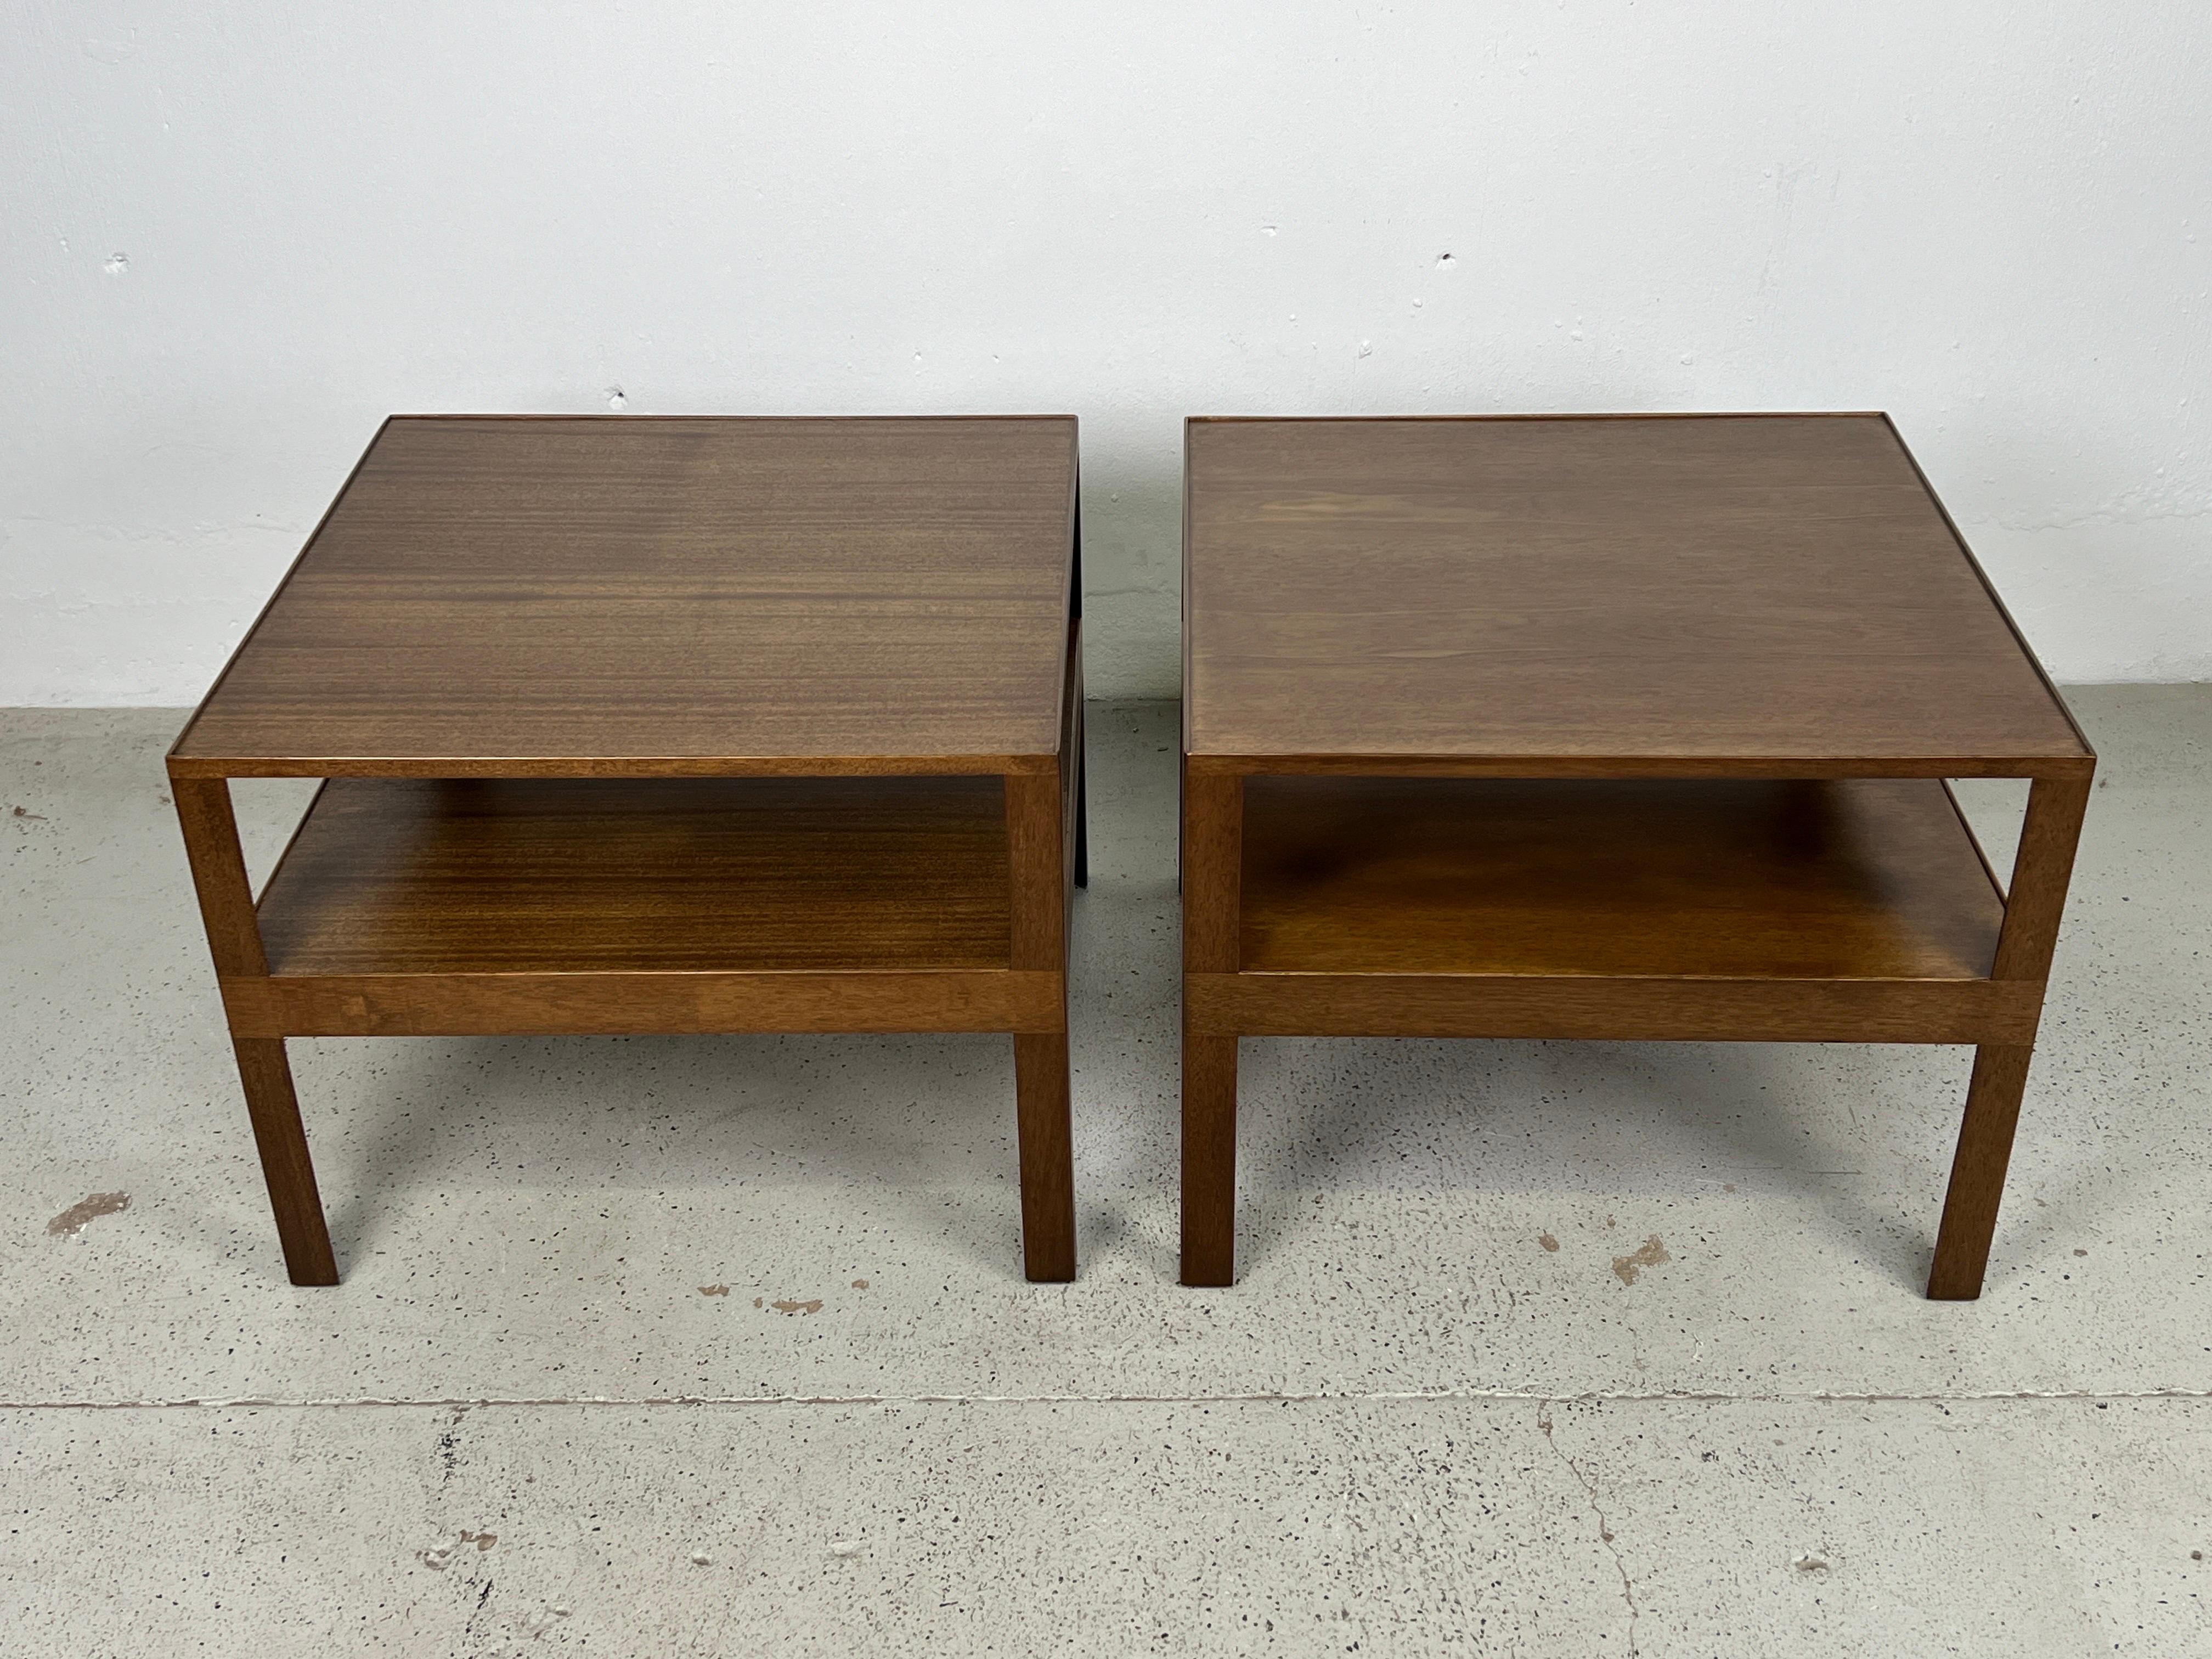 Pair of Tables by Edward Wormley for Dunbar In Good Condition For Sale In Dallas, TX